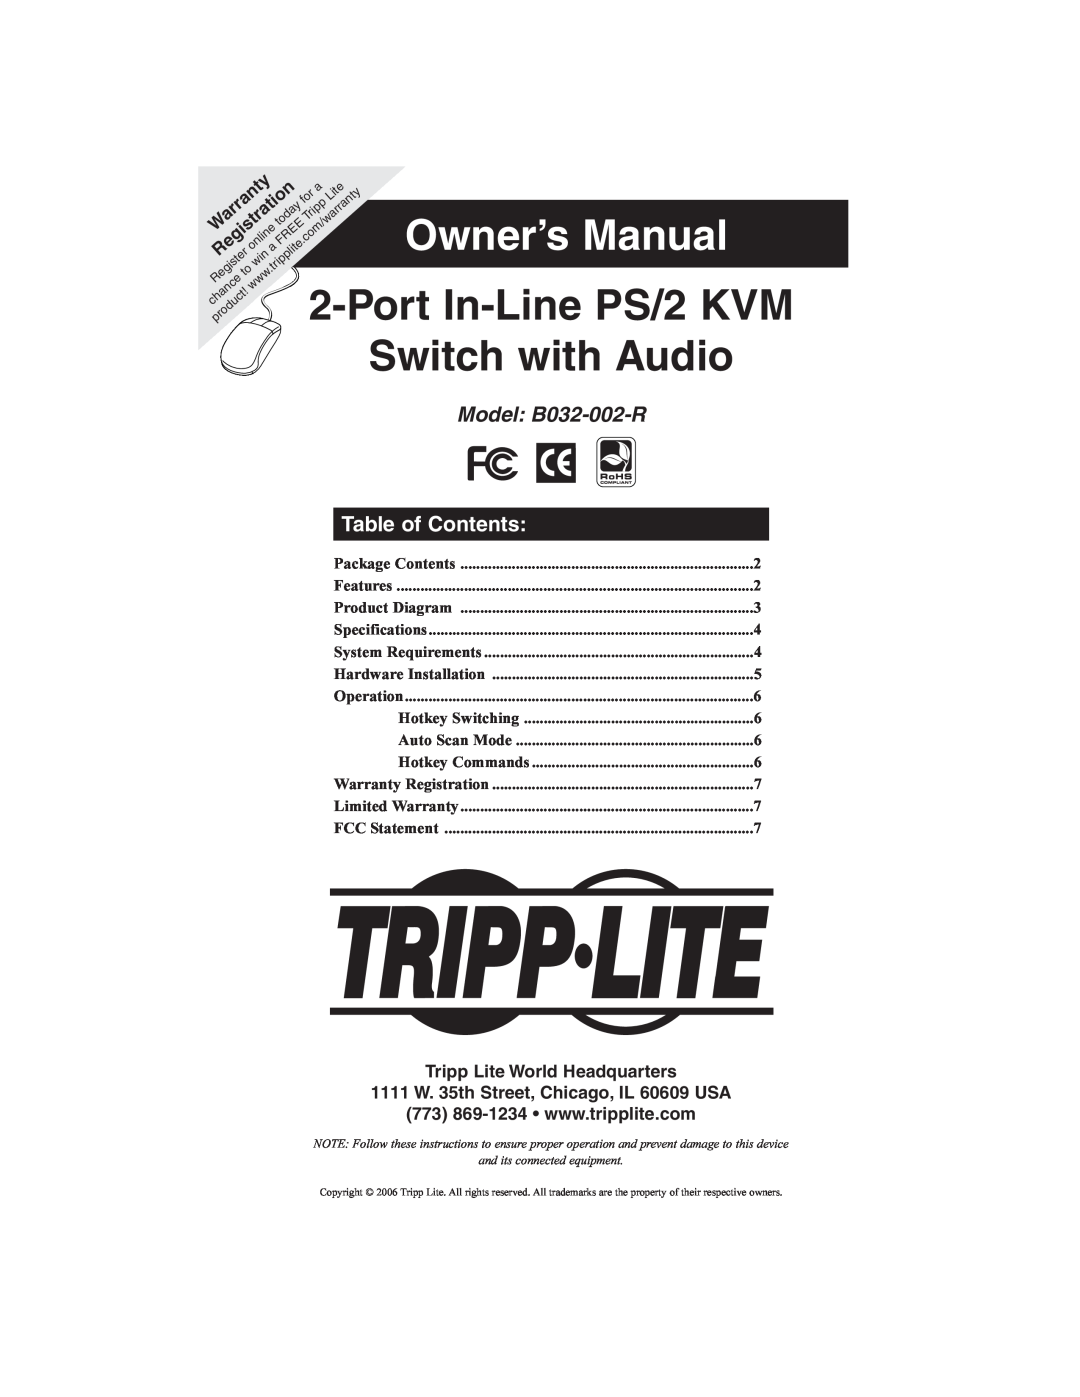 Tripp Lite B032-002-R owner manual Table of Contents, Tripp Lite World Headquarters, Owner’s Manual, Port In-Line PS/2 KVM 